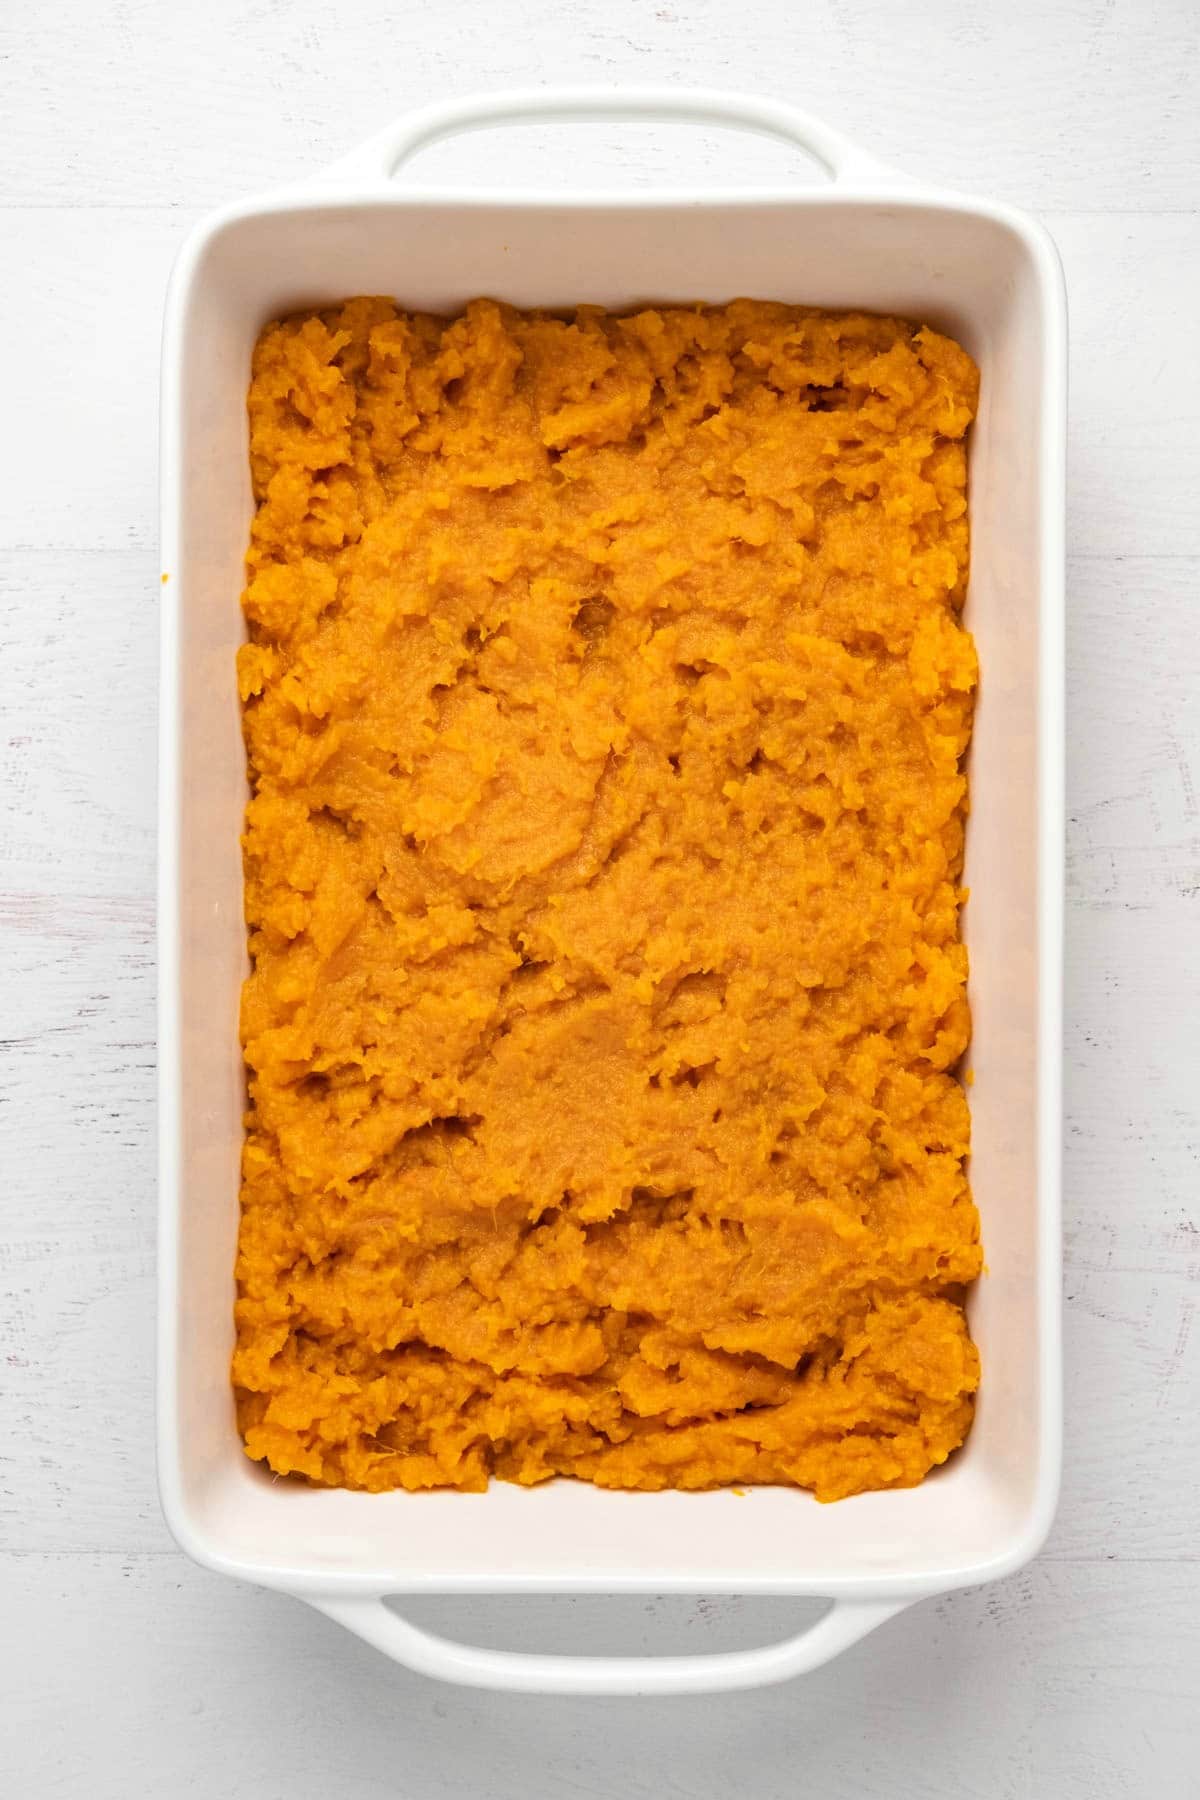 Mashed sweet potato in a white dish.